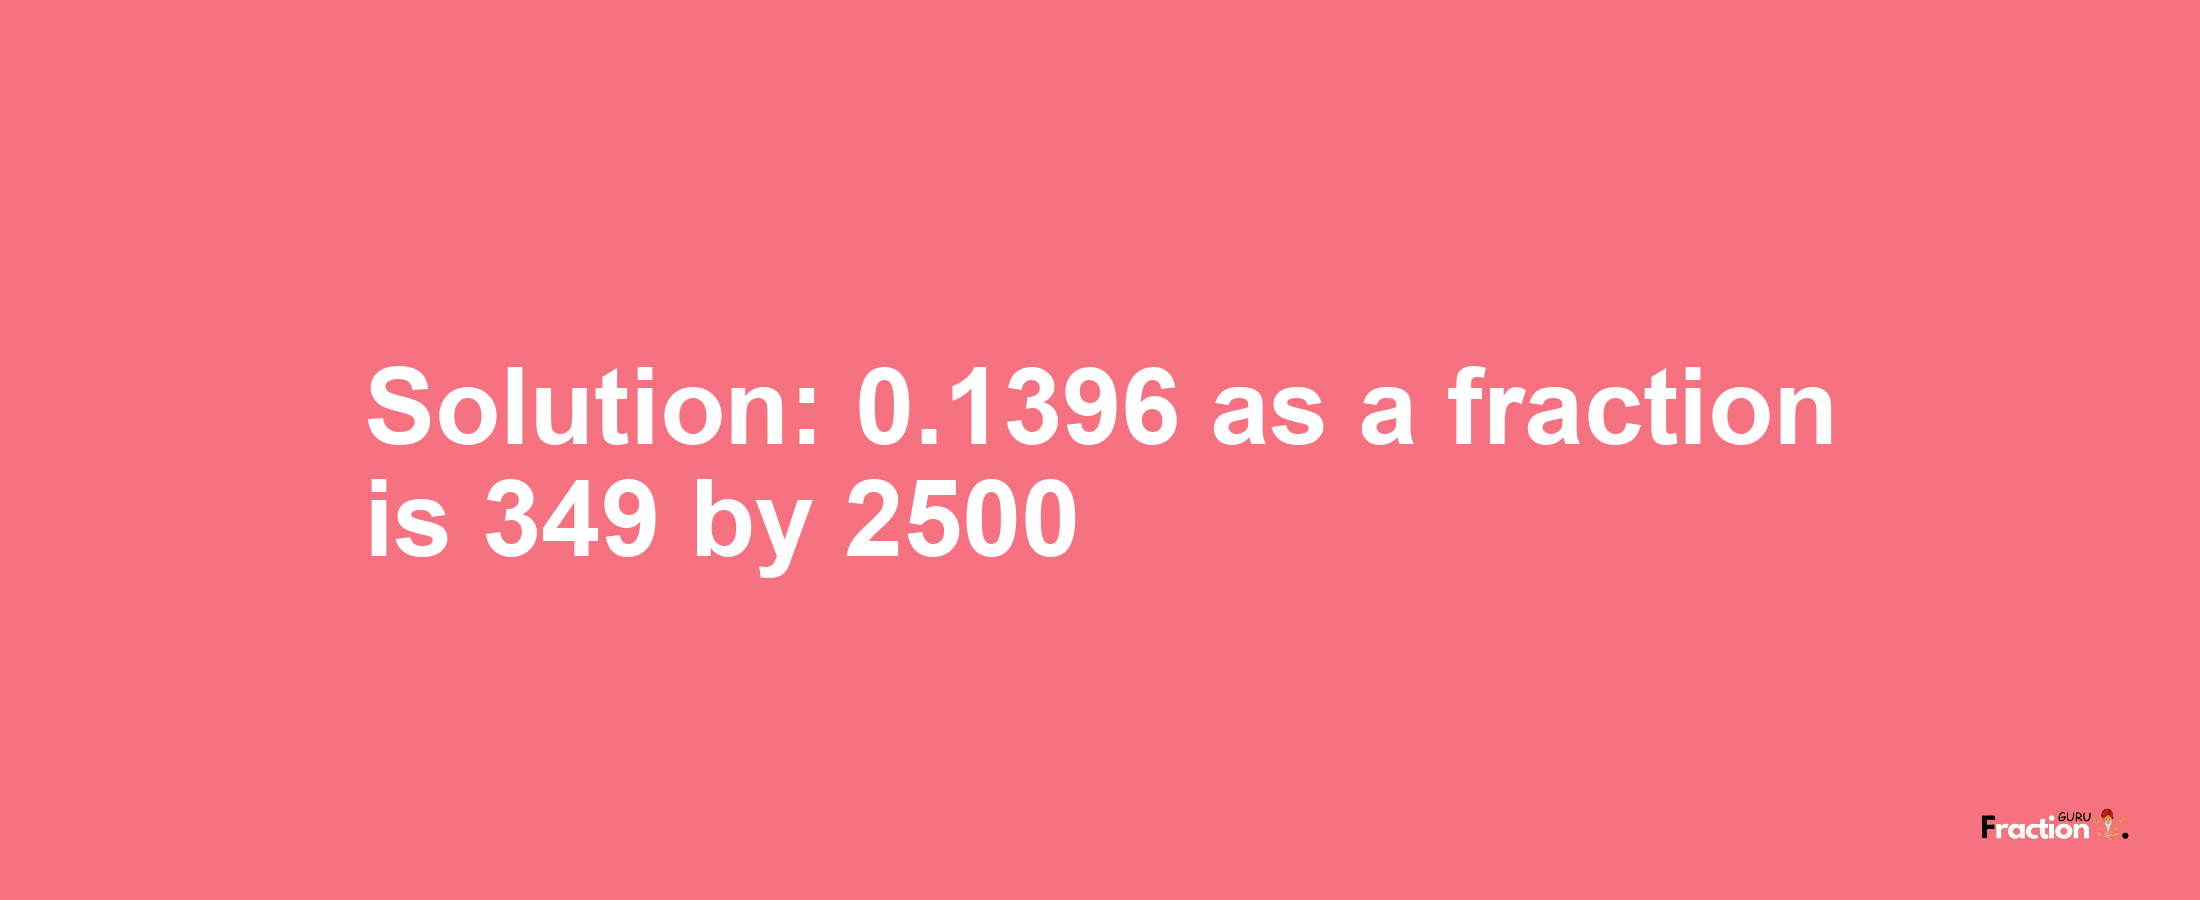 Solution:0.1396 as a fraction is 349/2500